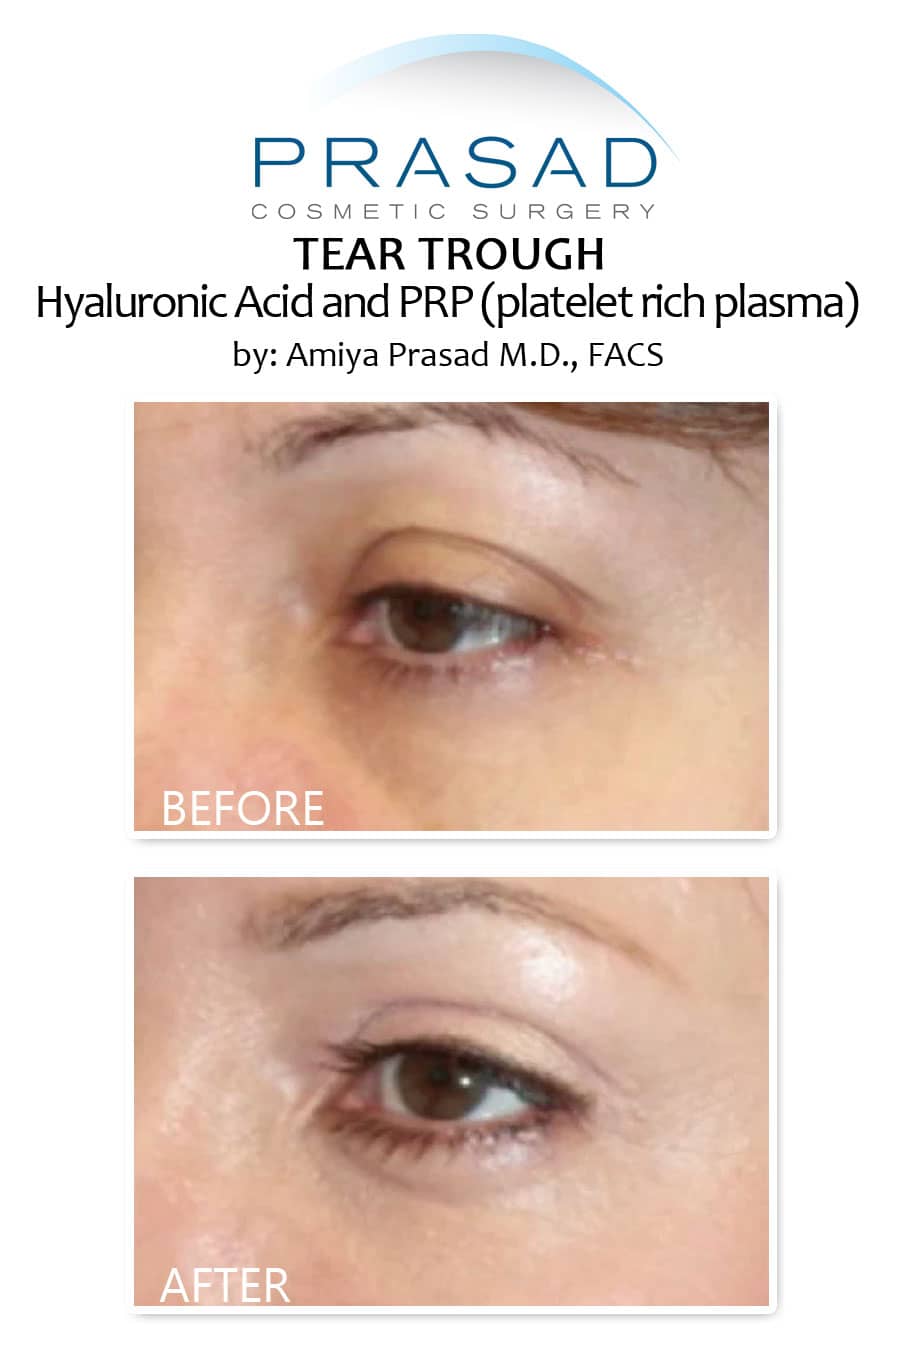 dermal fillers for sunken eyes before and after treatment results on female patient in 40s